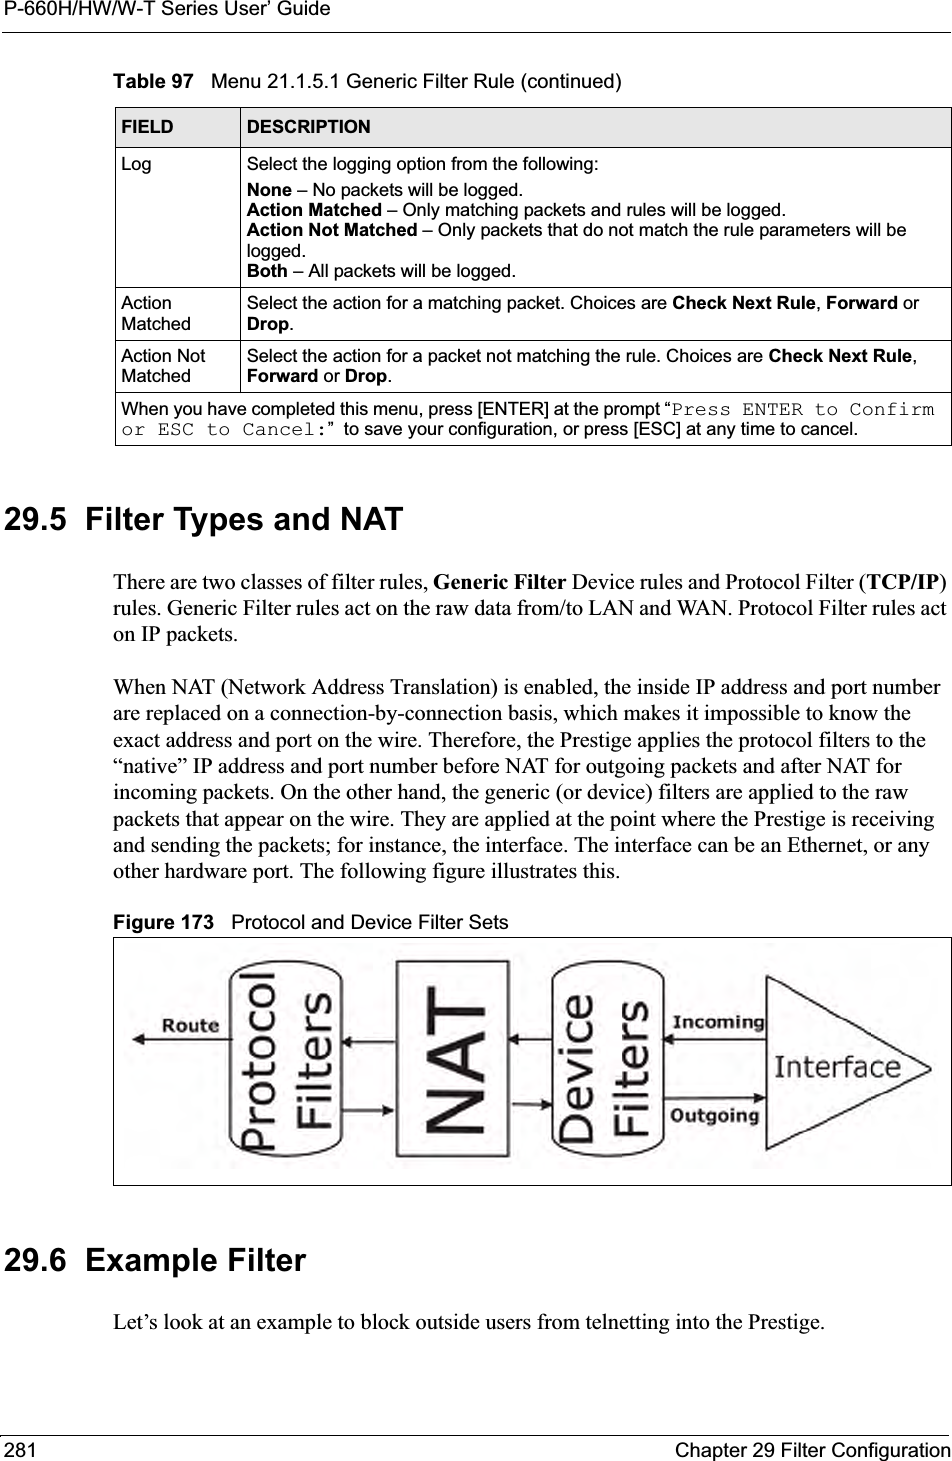 P-660H/HW/W-T Series User’ Guide281 Chapter 29 Filter Configuration29.5  Filter Types and NAT There are two classes of filter rules, Generic Filter Device rules and Protocol Filter (TCP/IP)rules. Generic Filter rules act on the raw data from/to LAN and WAN. Protocol Filter rules act on IP packets.When NAT (Network Address Translation) is enabled, the inside IP address and port number are replaced on a connection-by-connection basis, which makes it impossible to know the exact address and port on the wire. Therefore, the Prestige applies the protocol filters to the “native” IP address and port number before NAT for outgoing packets and after NAT for incoming packets. On the other hand, the generic (or device) filters are applied to the raw packets that appear on the wire. They are applied at the point where the Prestige is receiving and sending the packets; for instance, the interface. The interface can be an Ethernet, or any other hardware port. The following figure illustrates this.Figure 173   Protocol and Device Filter Sets29.6  Example FilterLet’s look at an example to block outside users from telnetting into the Prestige. Log Select the logging option from the following:None – No packets will be logged.Action Matched – Only matching packets and rules will be logged.Action Not Matched – Only packets that do not match the rule parameters will be logged.Both – All packets will be logged.Action MatchedSelect the action for a matching packet. Choices are Check Next Rule,Forward orDrop.Action Not MatchedSelect the action for a packet not matching the rule. Choices are Check Next Rule,Forward or Drop.When you have completed this menu, press [ENTER] at the prompt “Press ENTER to Confirm or ESC to Cancel:”  to save your configuration, or press [ESC] at any time to cancel.Table 97   Menu 21.1.5.1 Generic Filter Rule (continued)FIELD DESCRIPTION